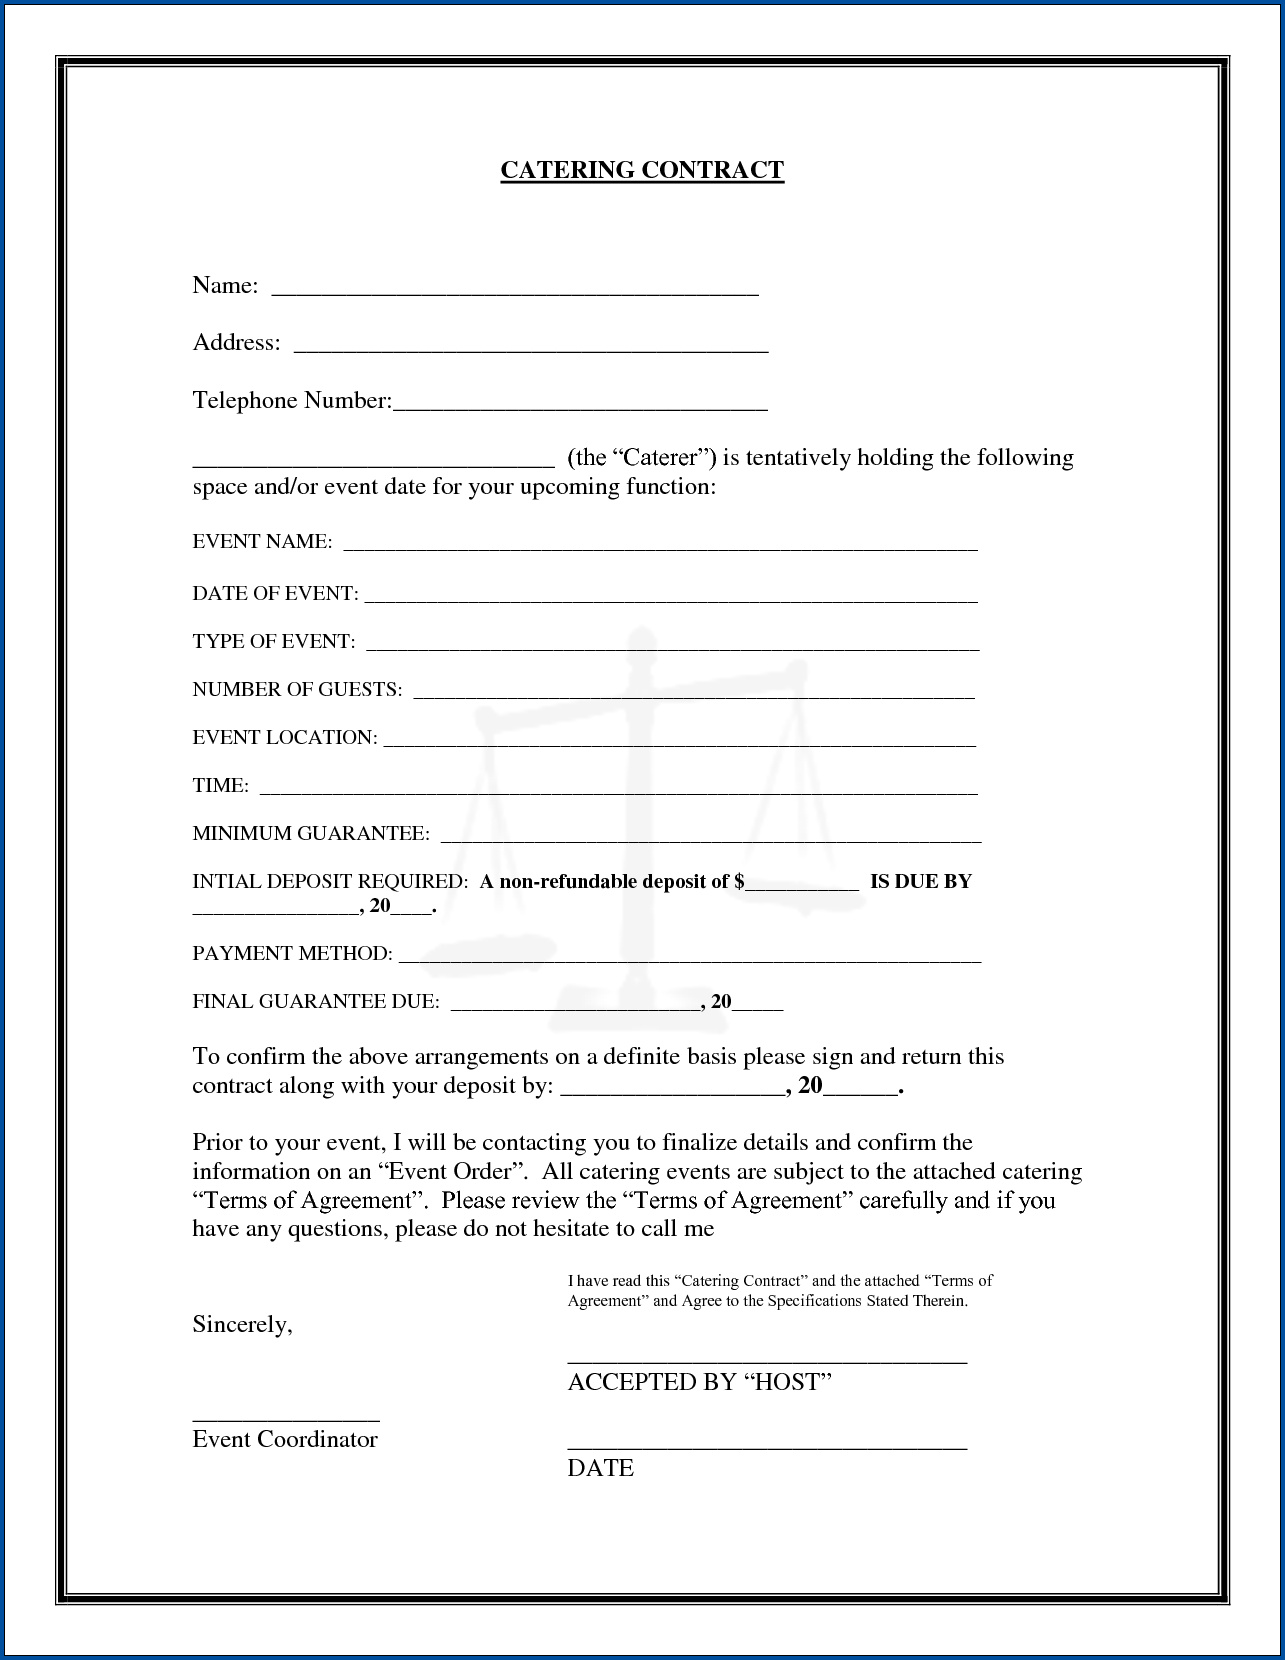 Example of Catering Contract Template